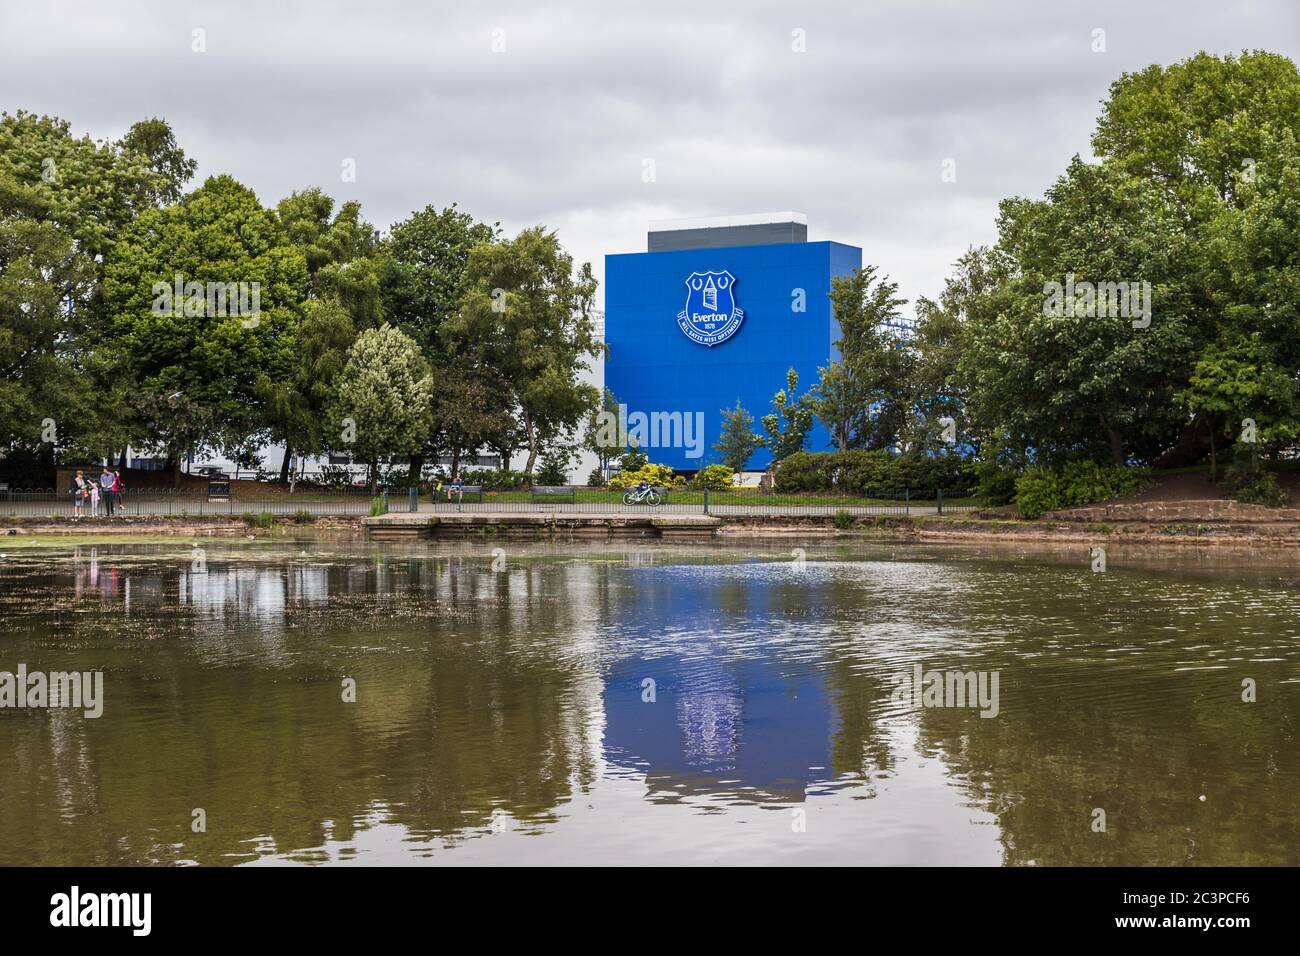 The home of Everton FC (Goodison Park) pictured reflecting in a lake within Stanley Park (England) in June 2020. Stock Photo